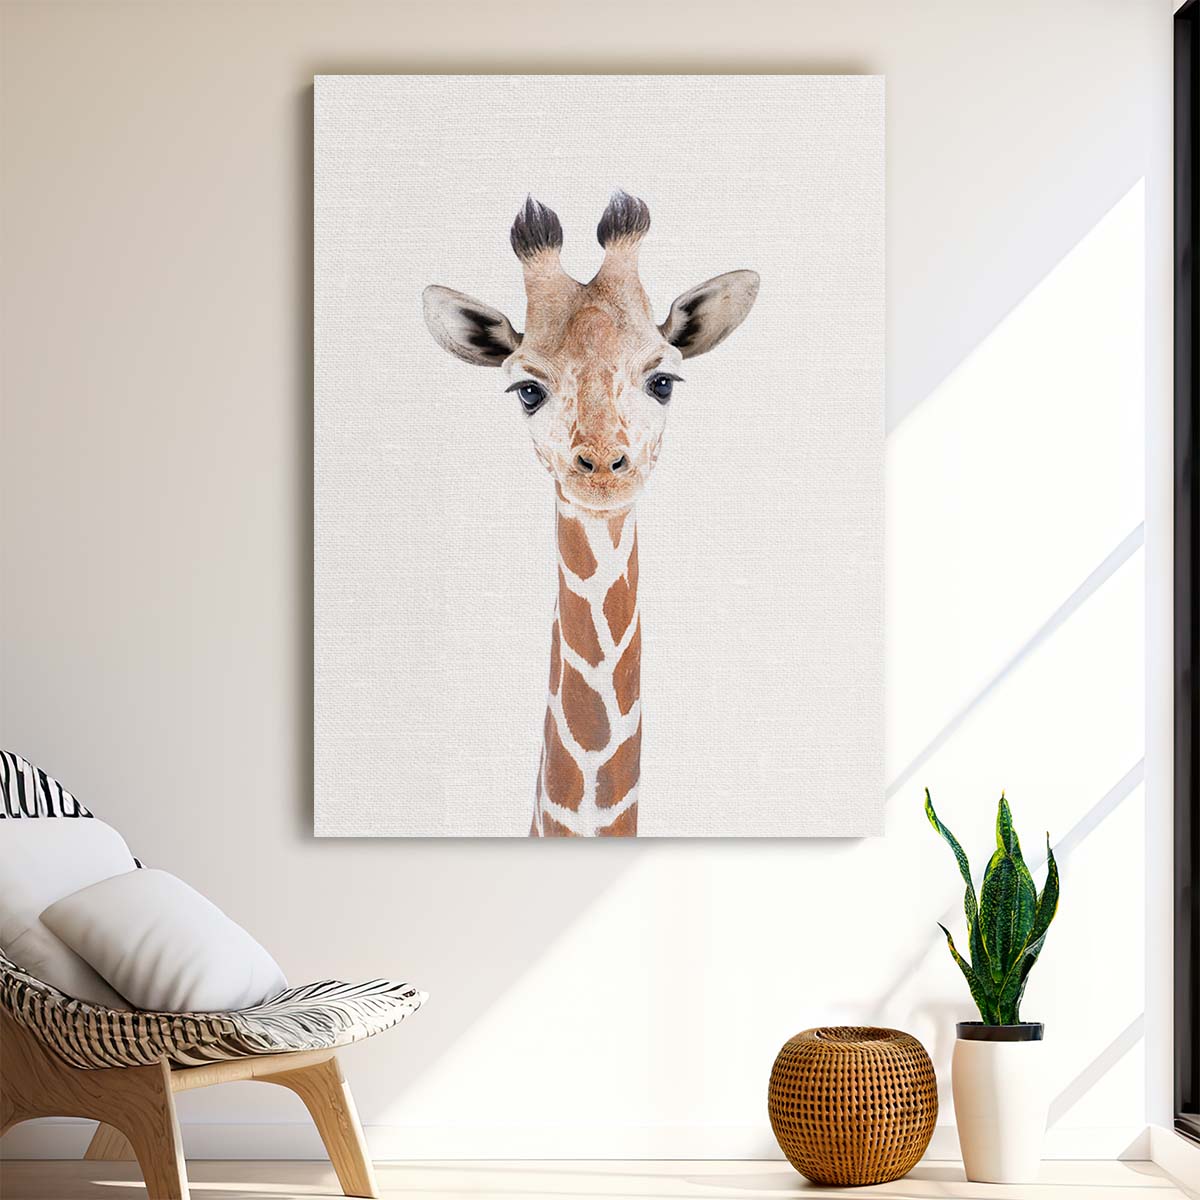 Bright Baby Giraffe Animal Portrait Photography on White Background by Luxuriance Designs, made in USA